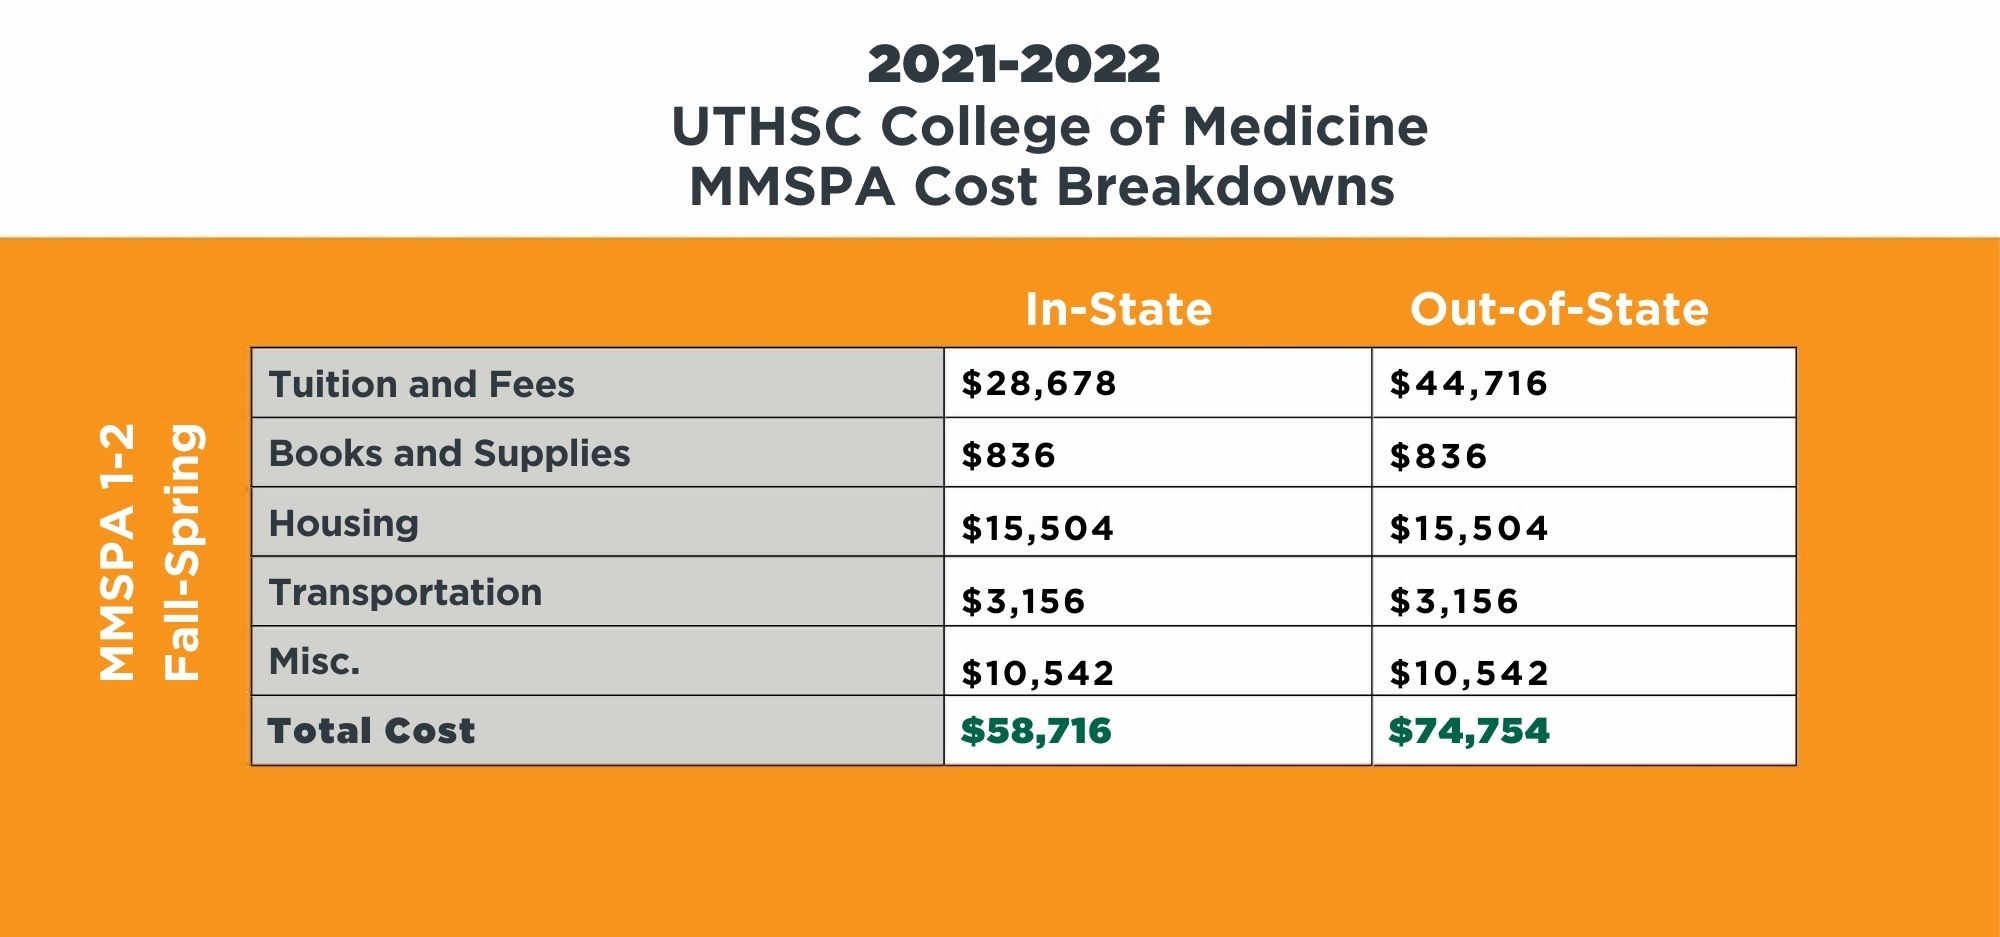 2021-2022 cost breakdown for physician assistant